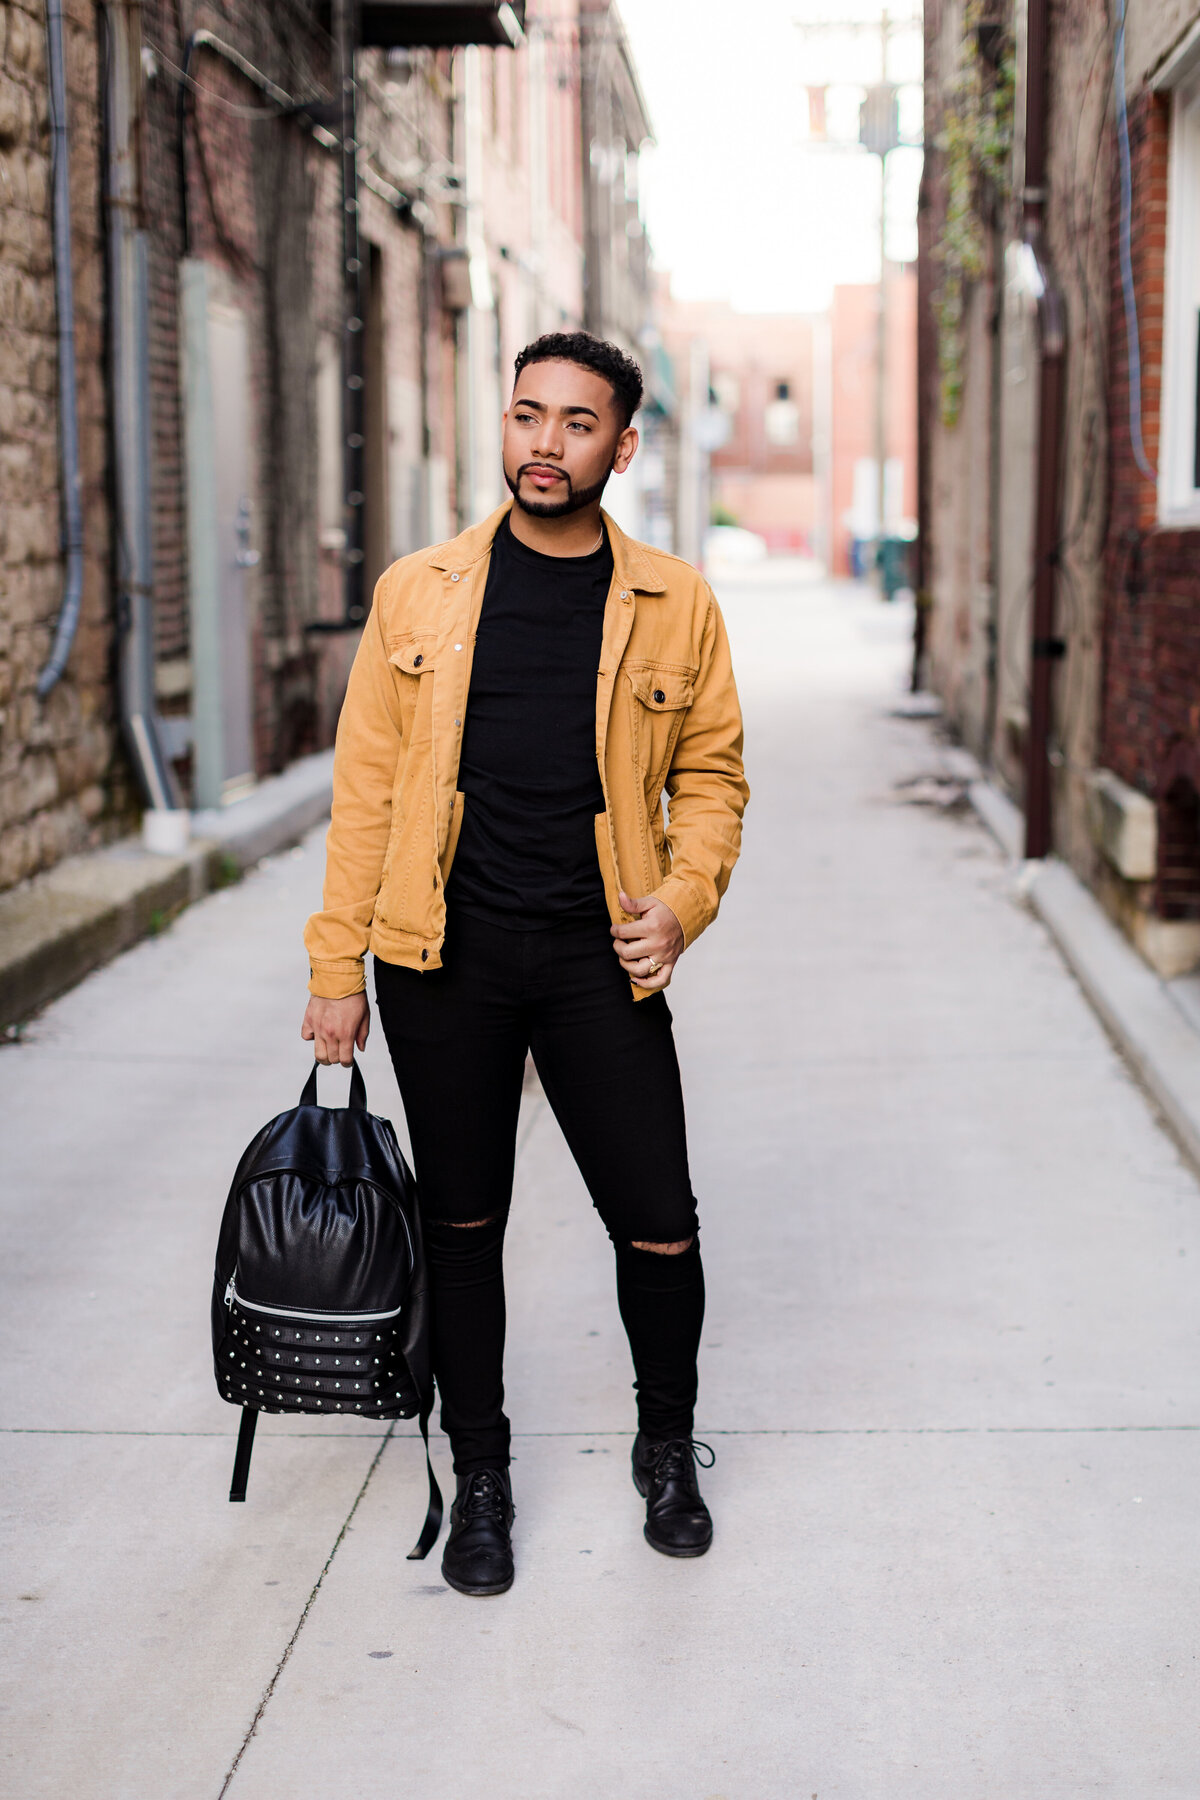 A young man wear a black outfit with a yellow jacket while holding a backpack by his side in an alleyway.